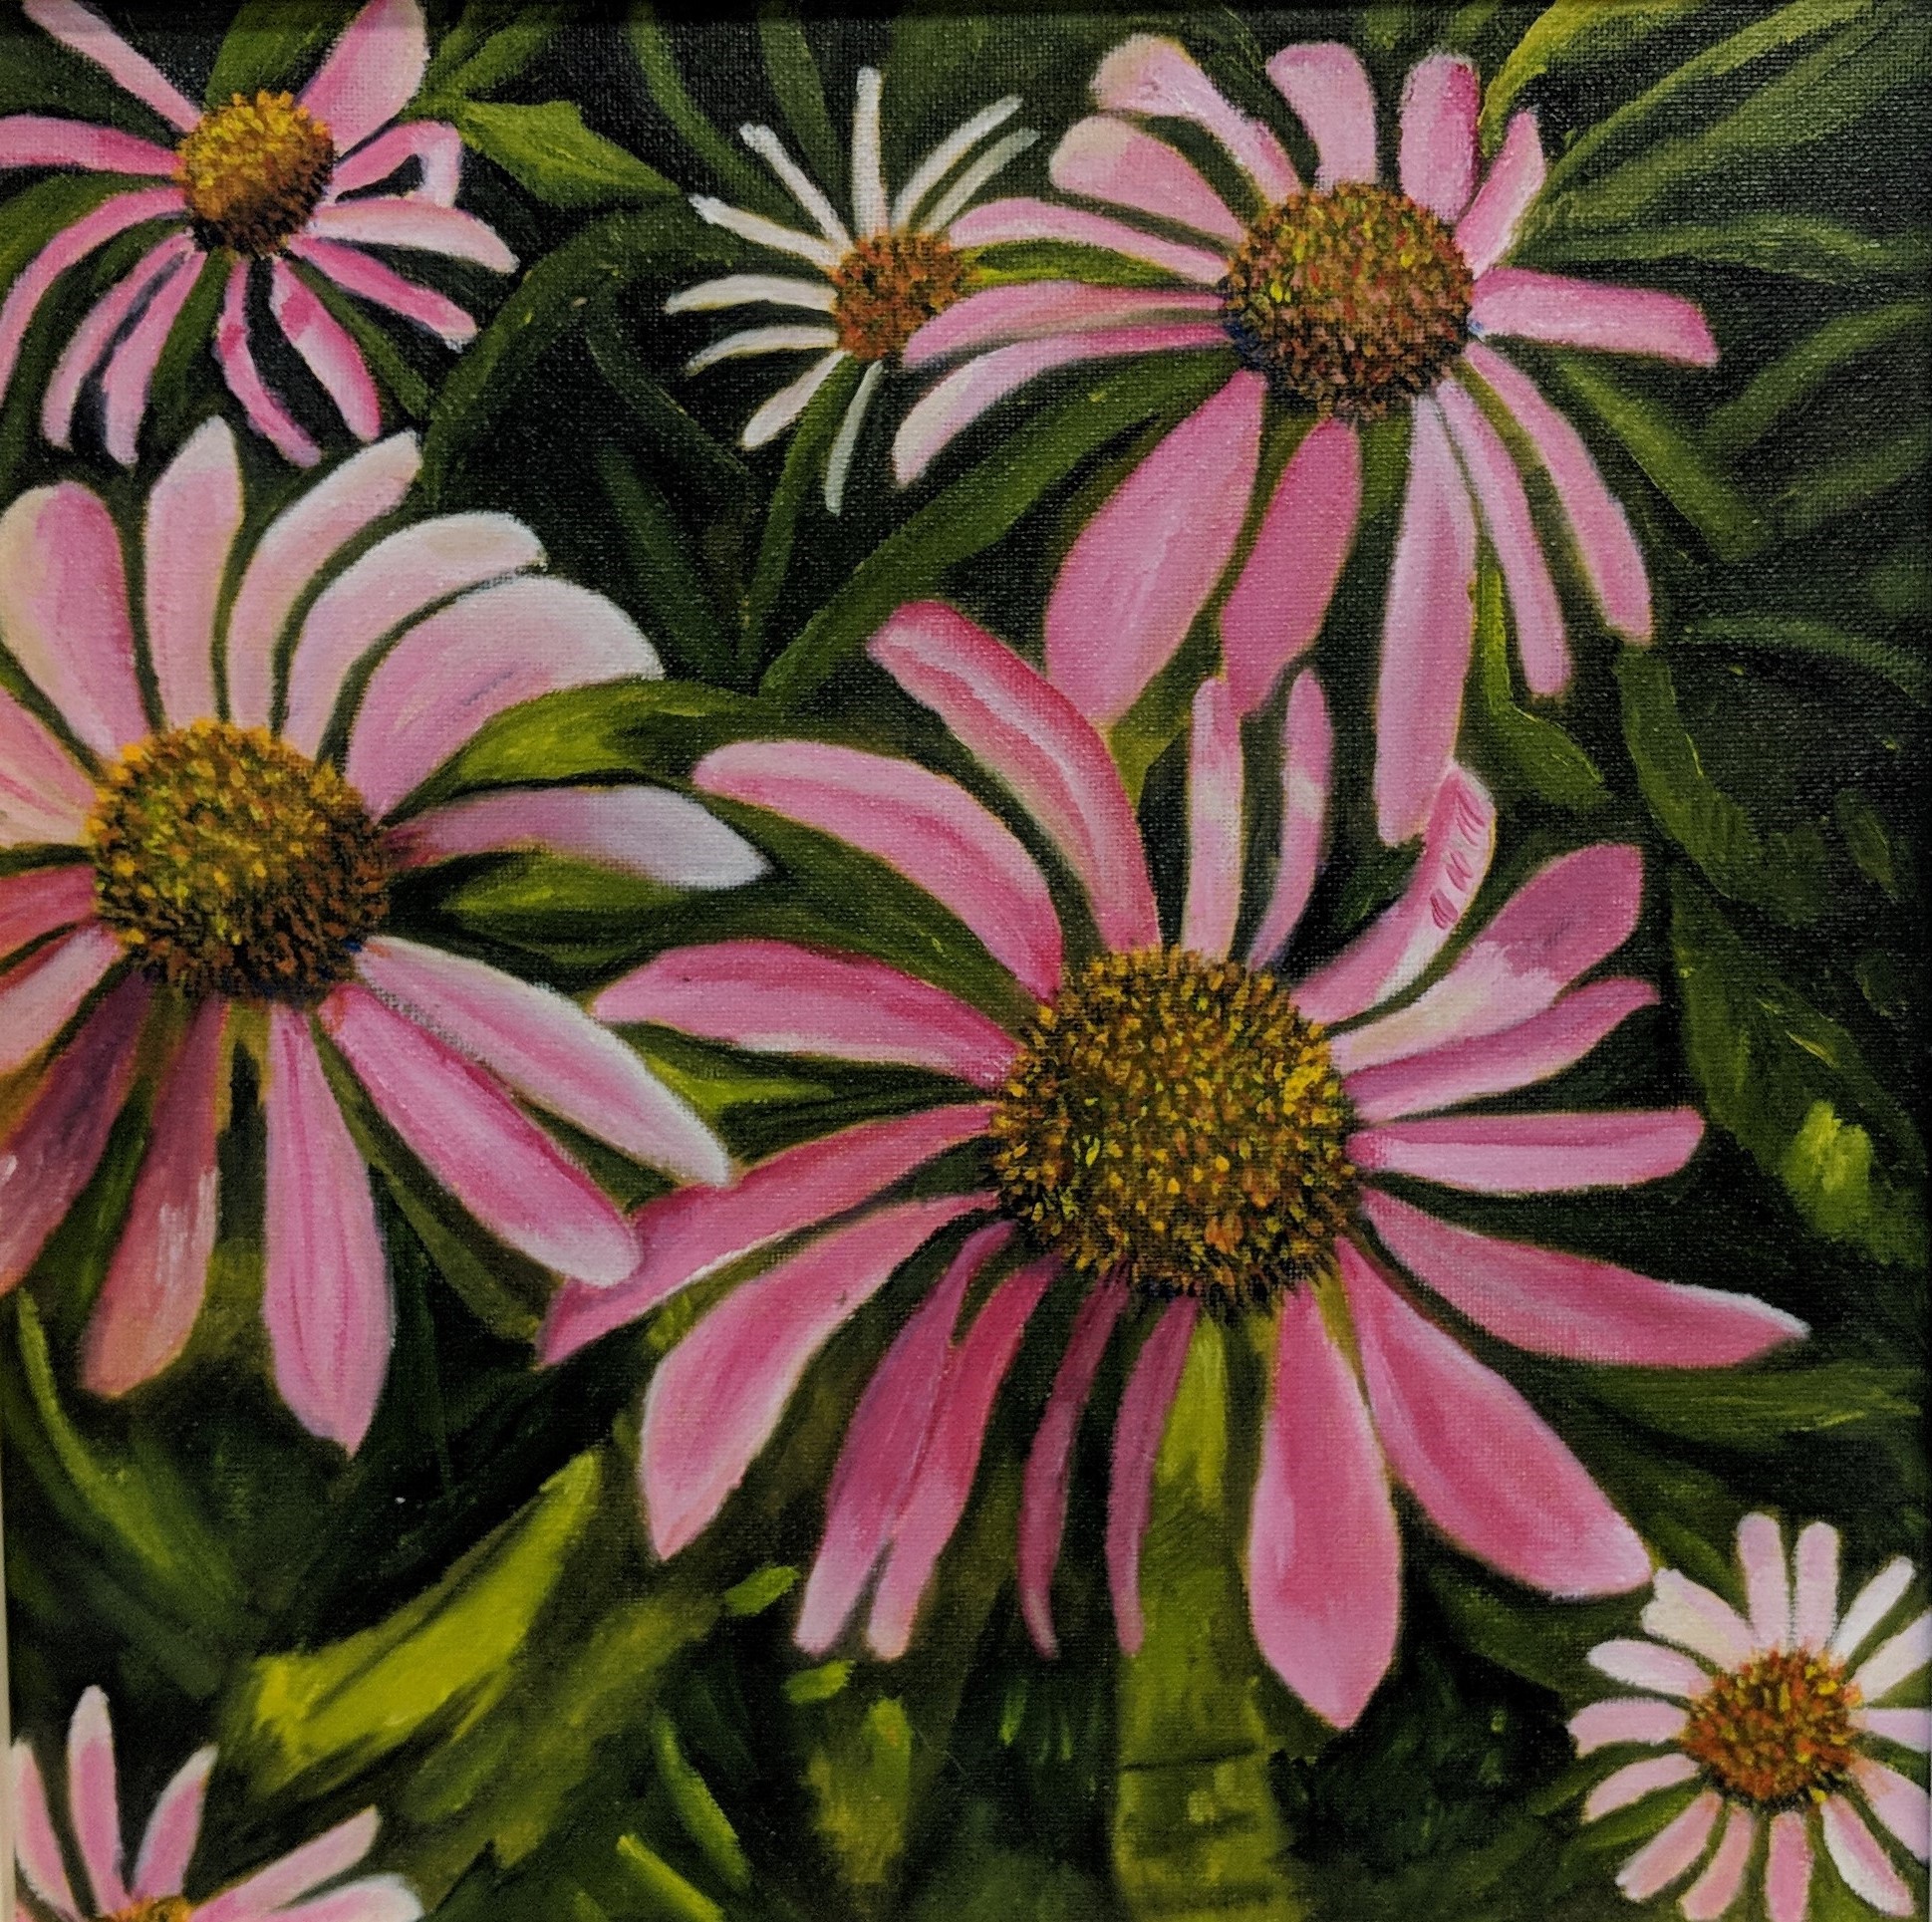 Pink Cone Flowers Oil Painting by Rebecca Jackson, , Art Exhibit at Brookside Gardens